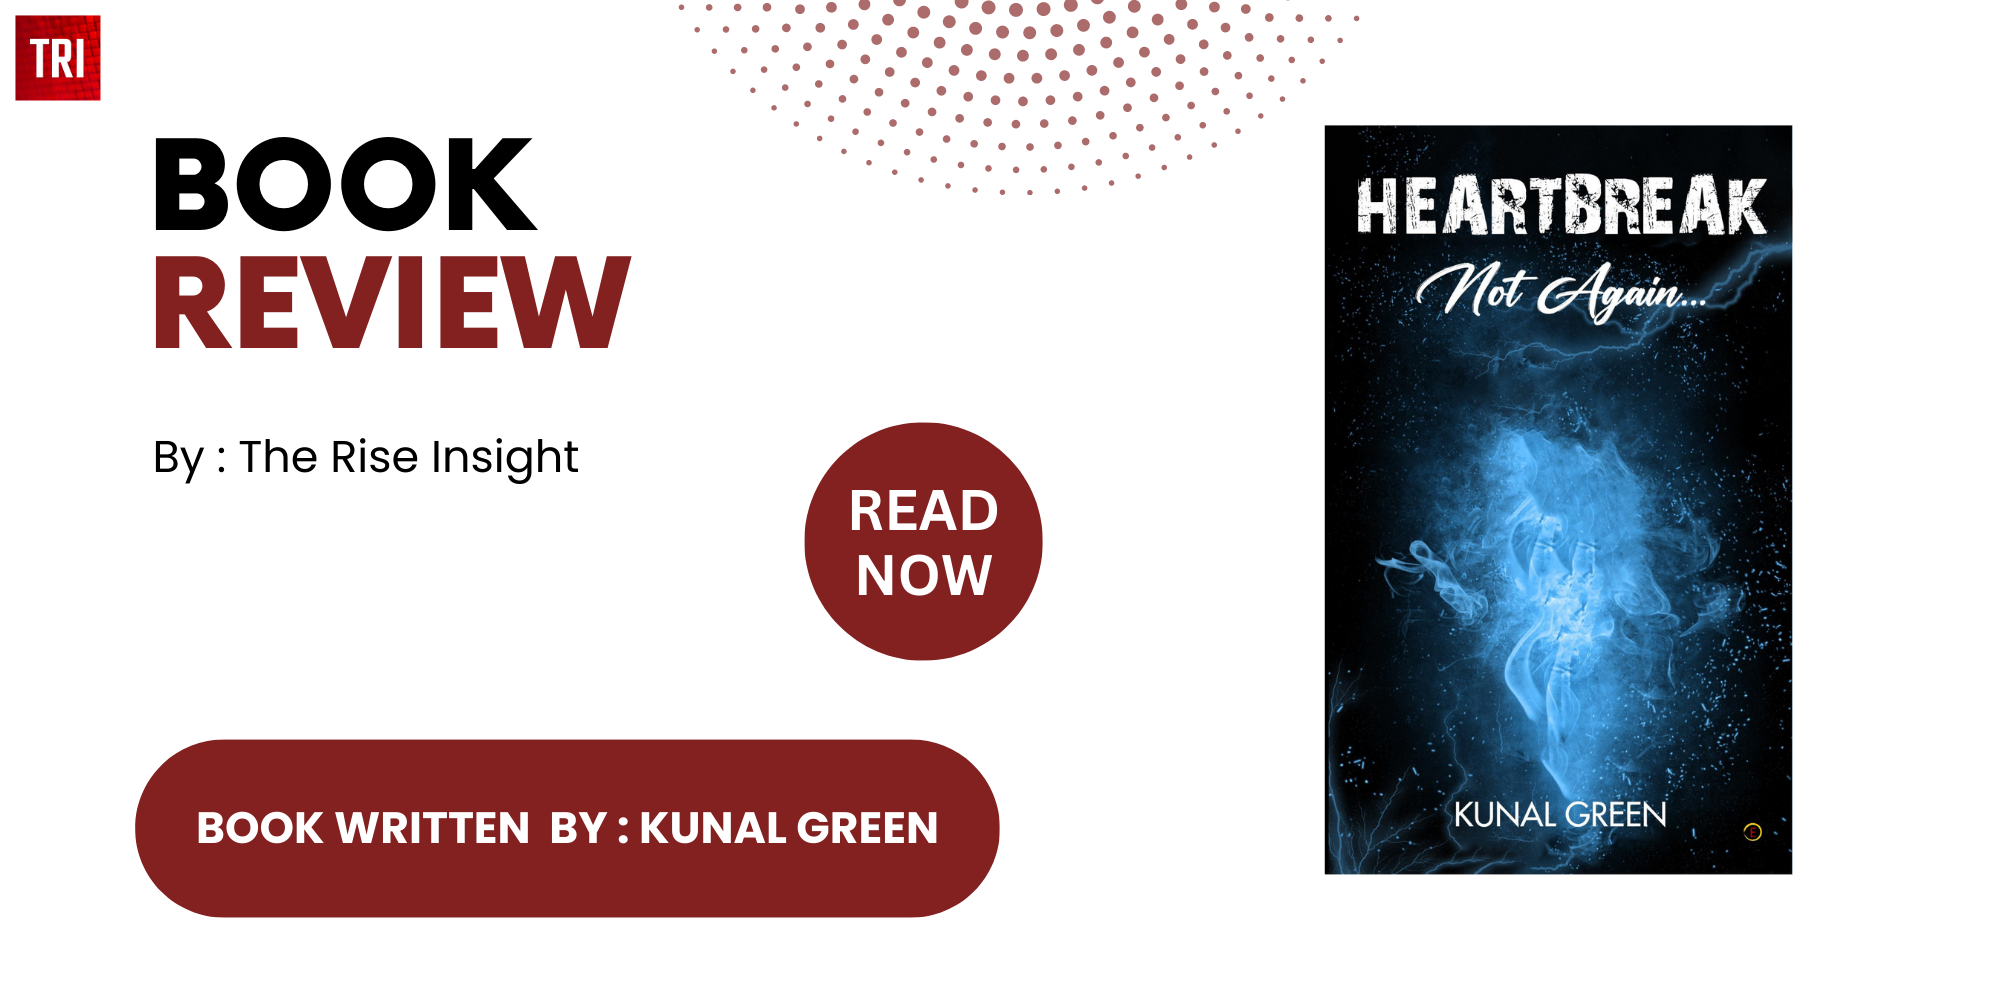 “Heartbreak Not Again…” by Kunal Green takes readers on a captivating journey